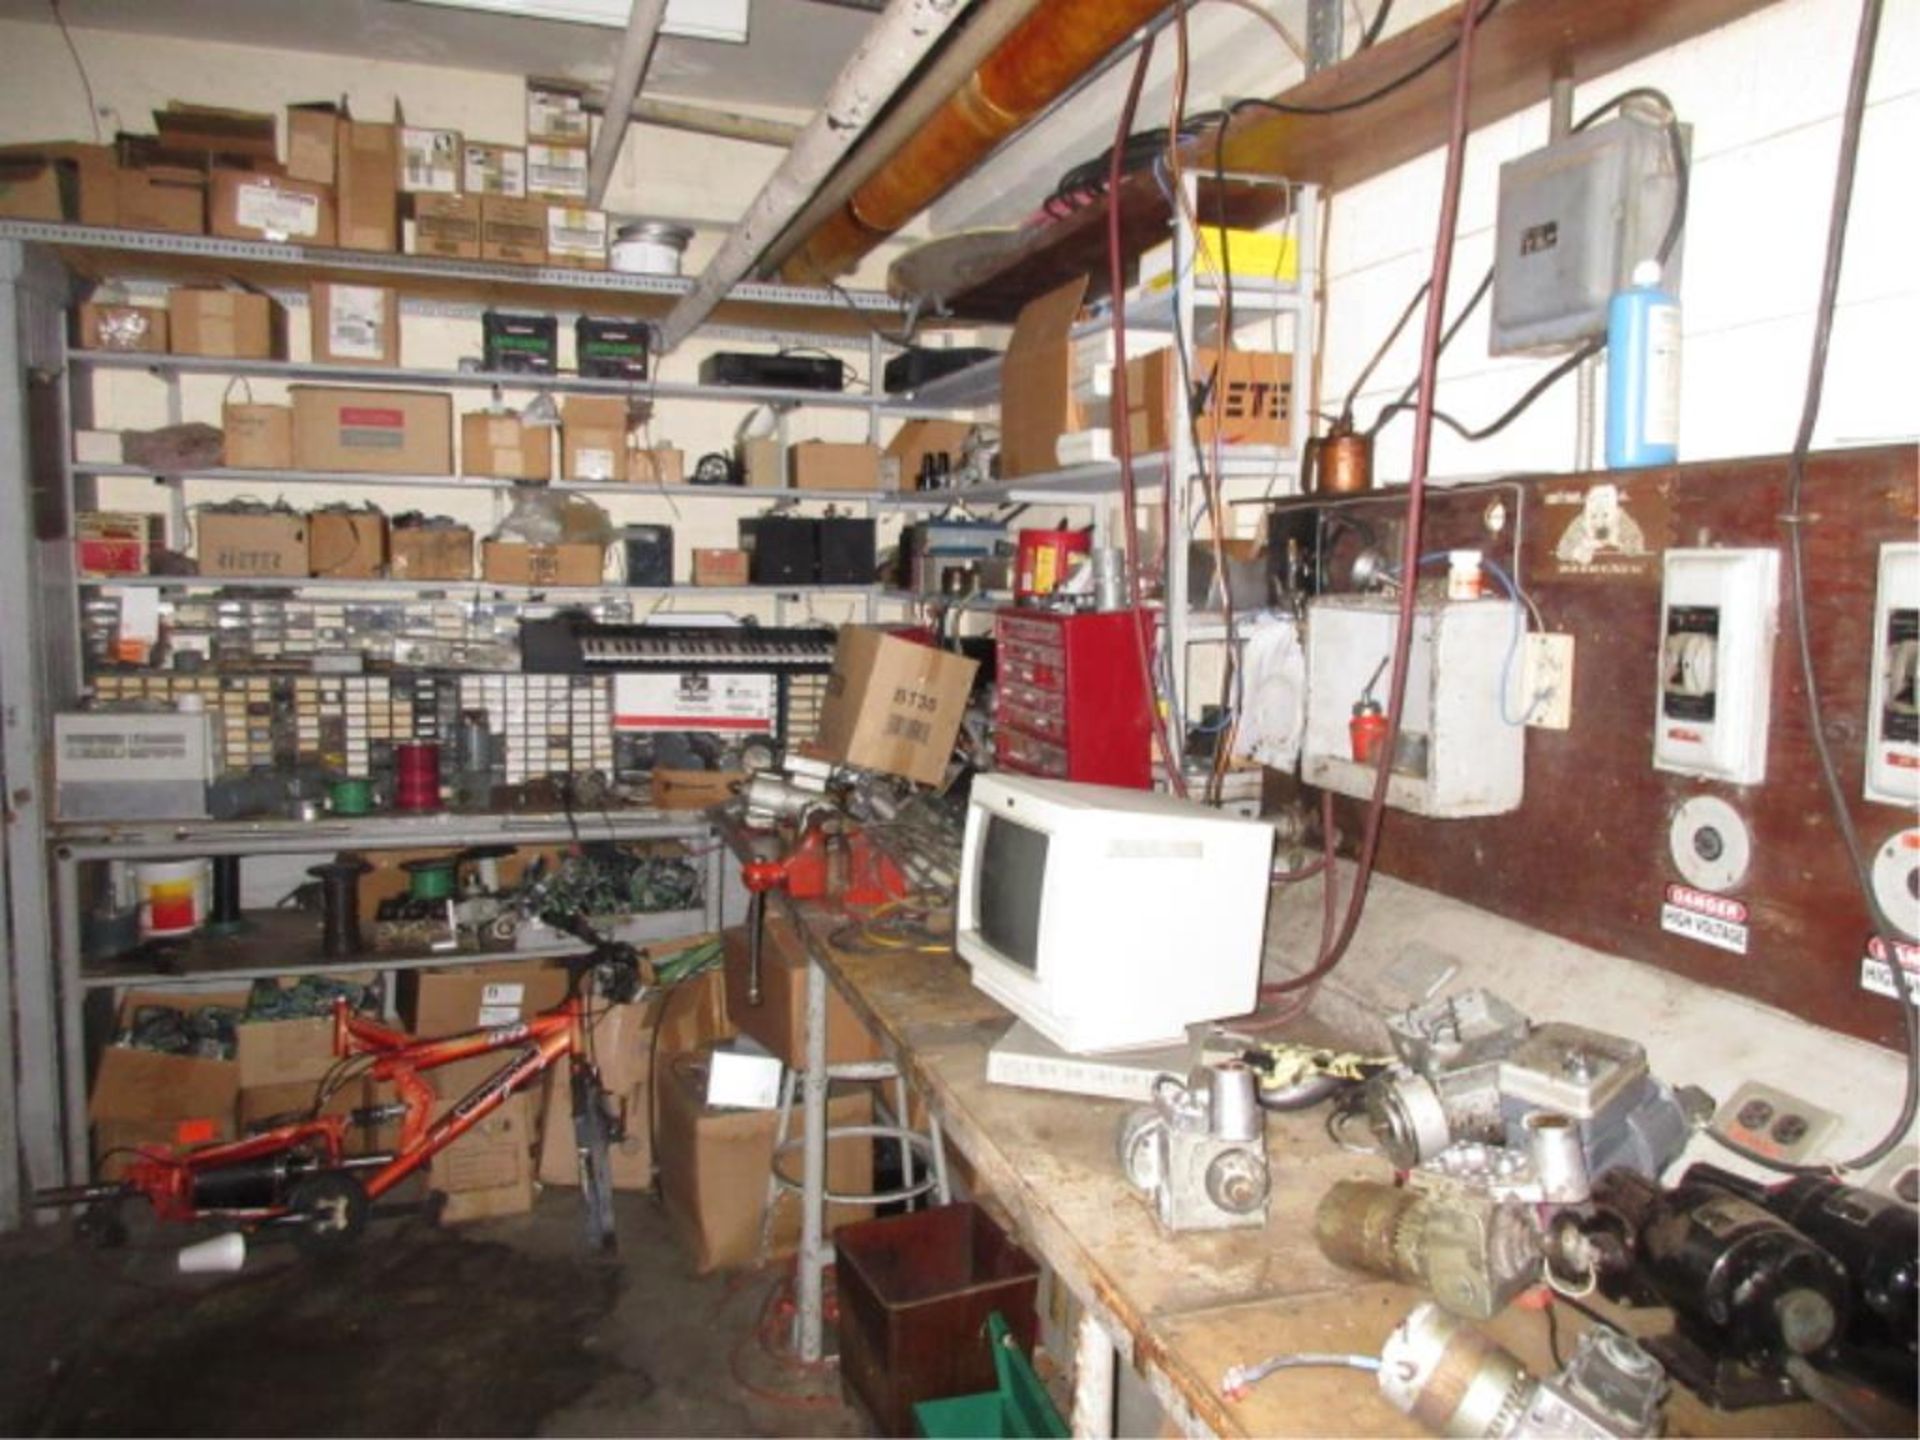 Lot Contents of Electrical Shop, includes cabinets, contents, conduit, etc. in three rooms. - Image 10 of 17